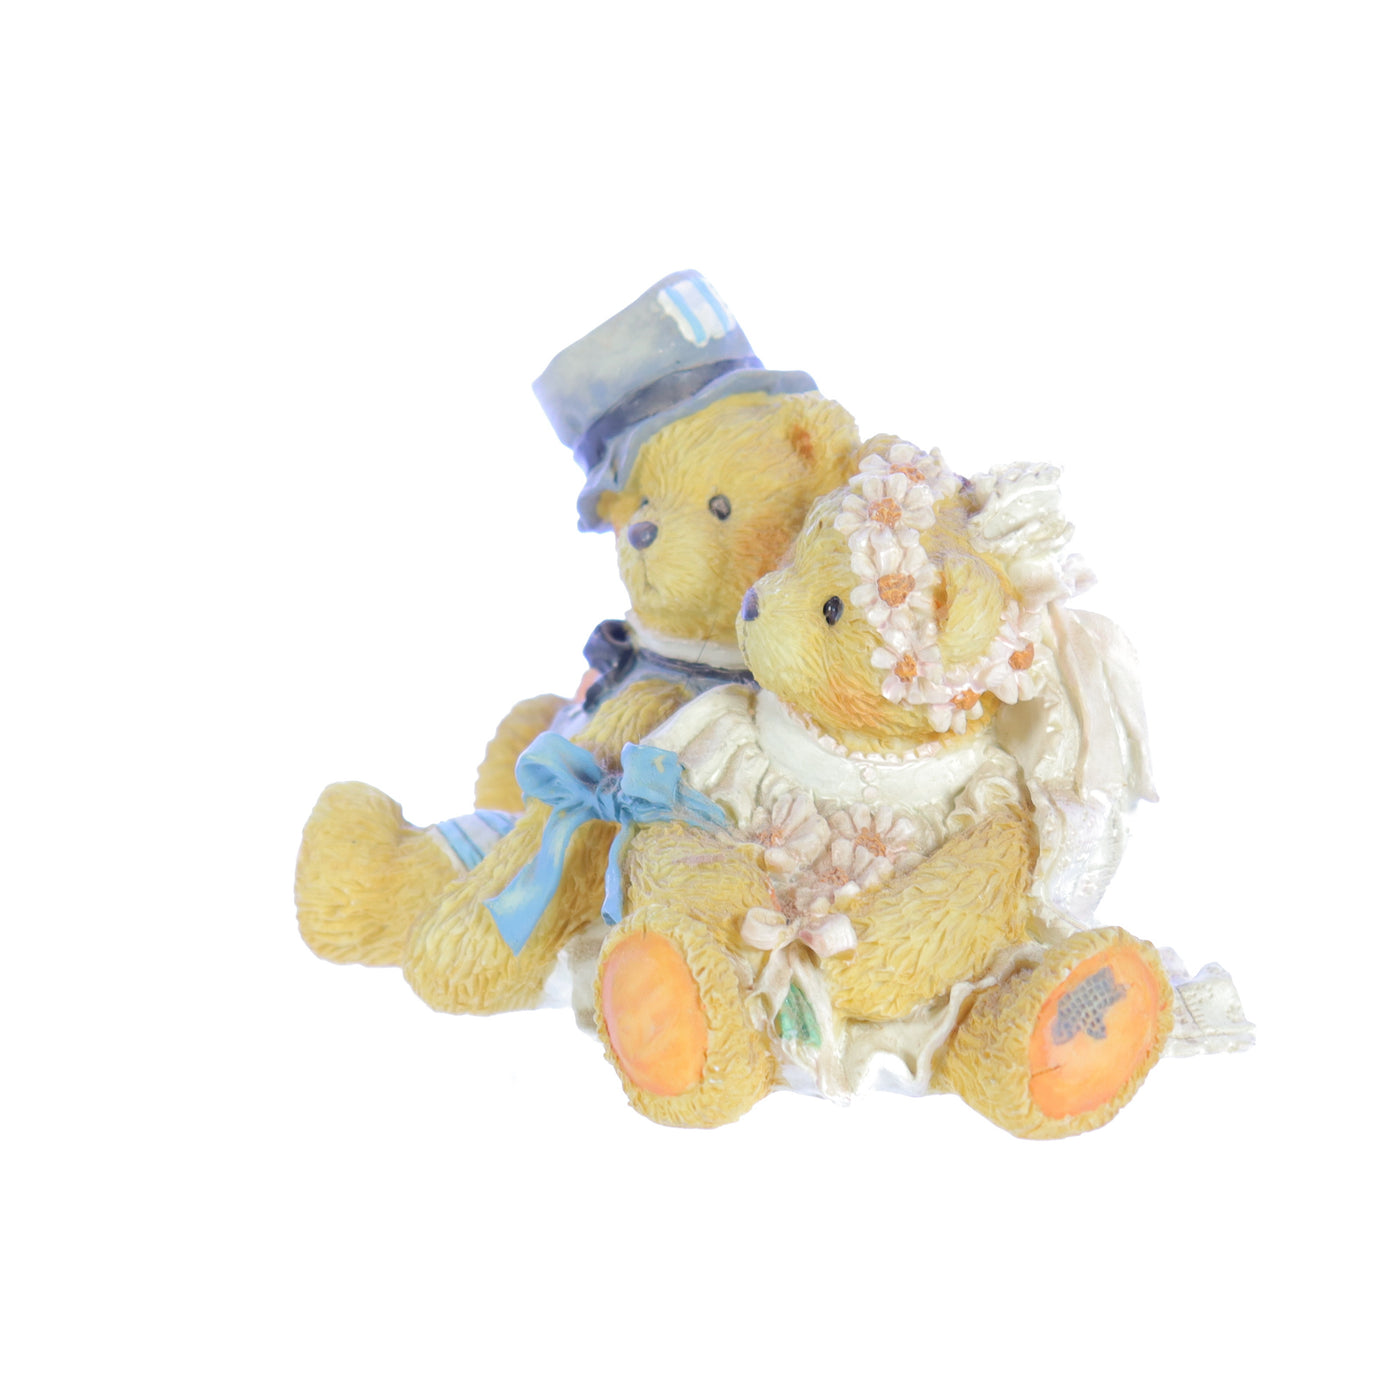 Robbie and Rachael - "Love Bears All Things" | # 911402 (Pre-Owned: No Box)